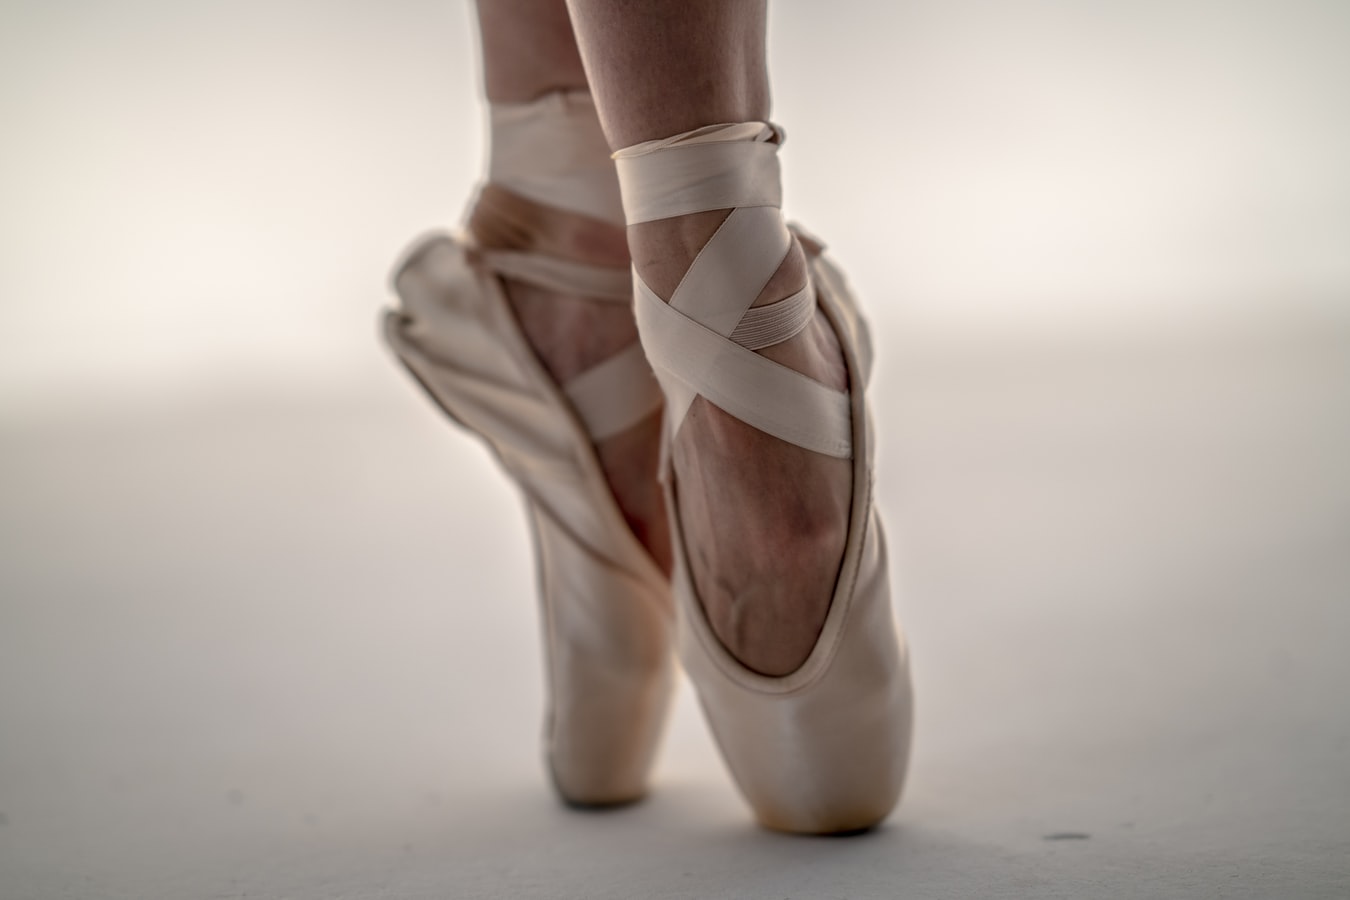 Law students to study ballet